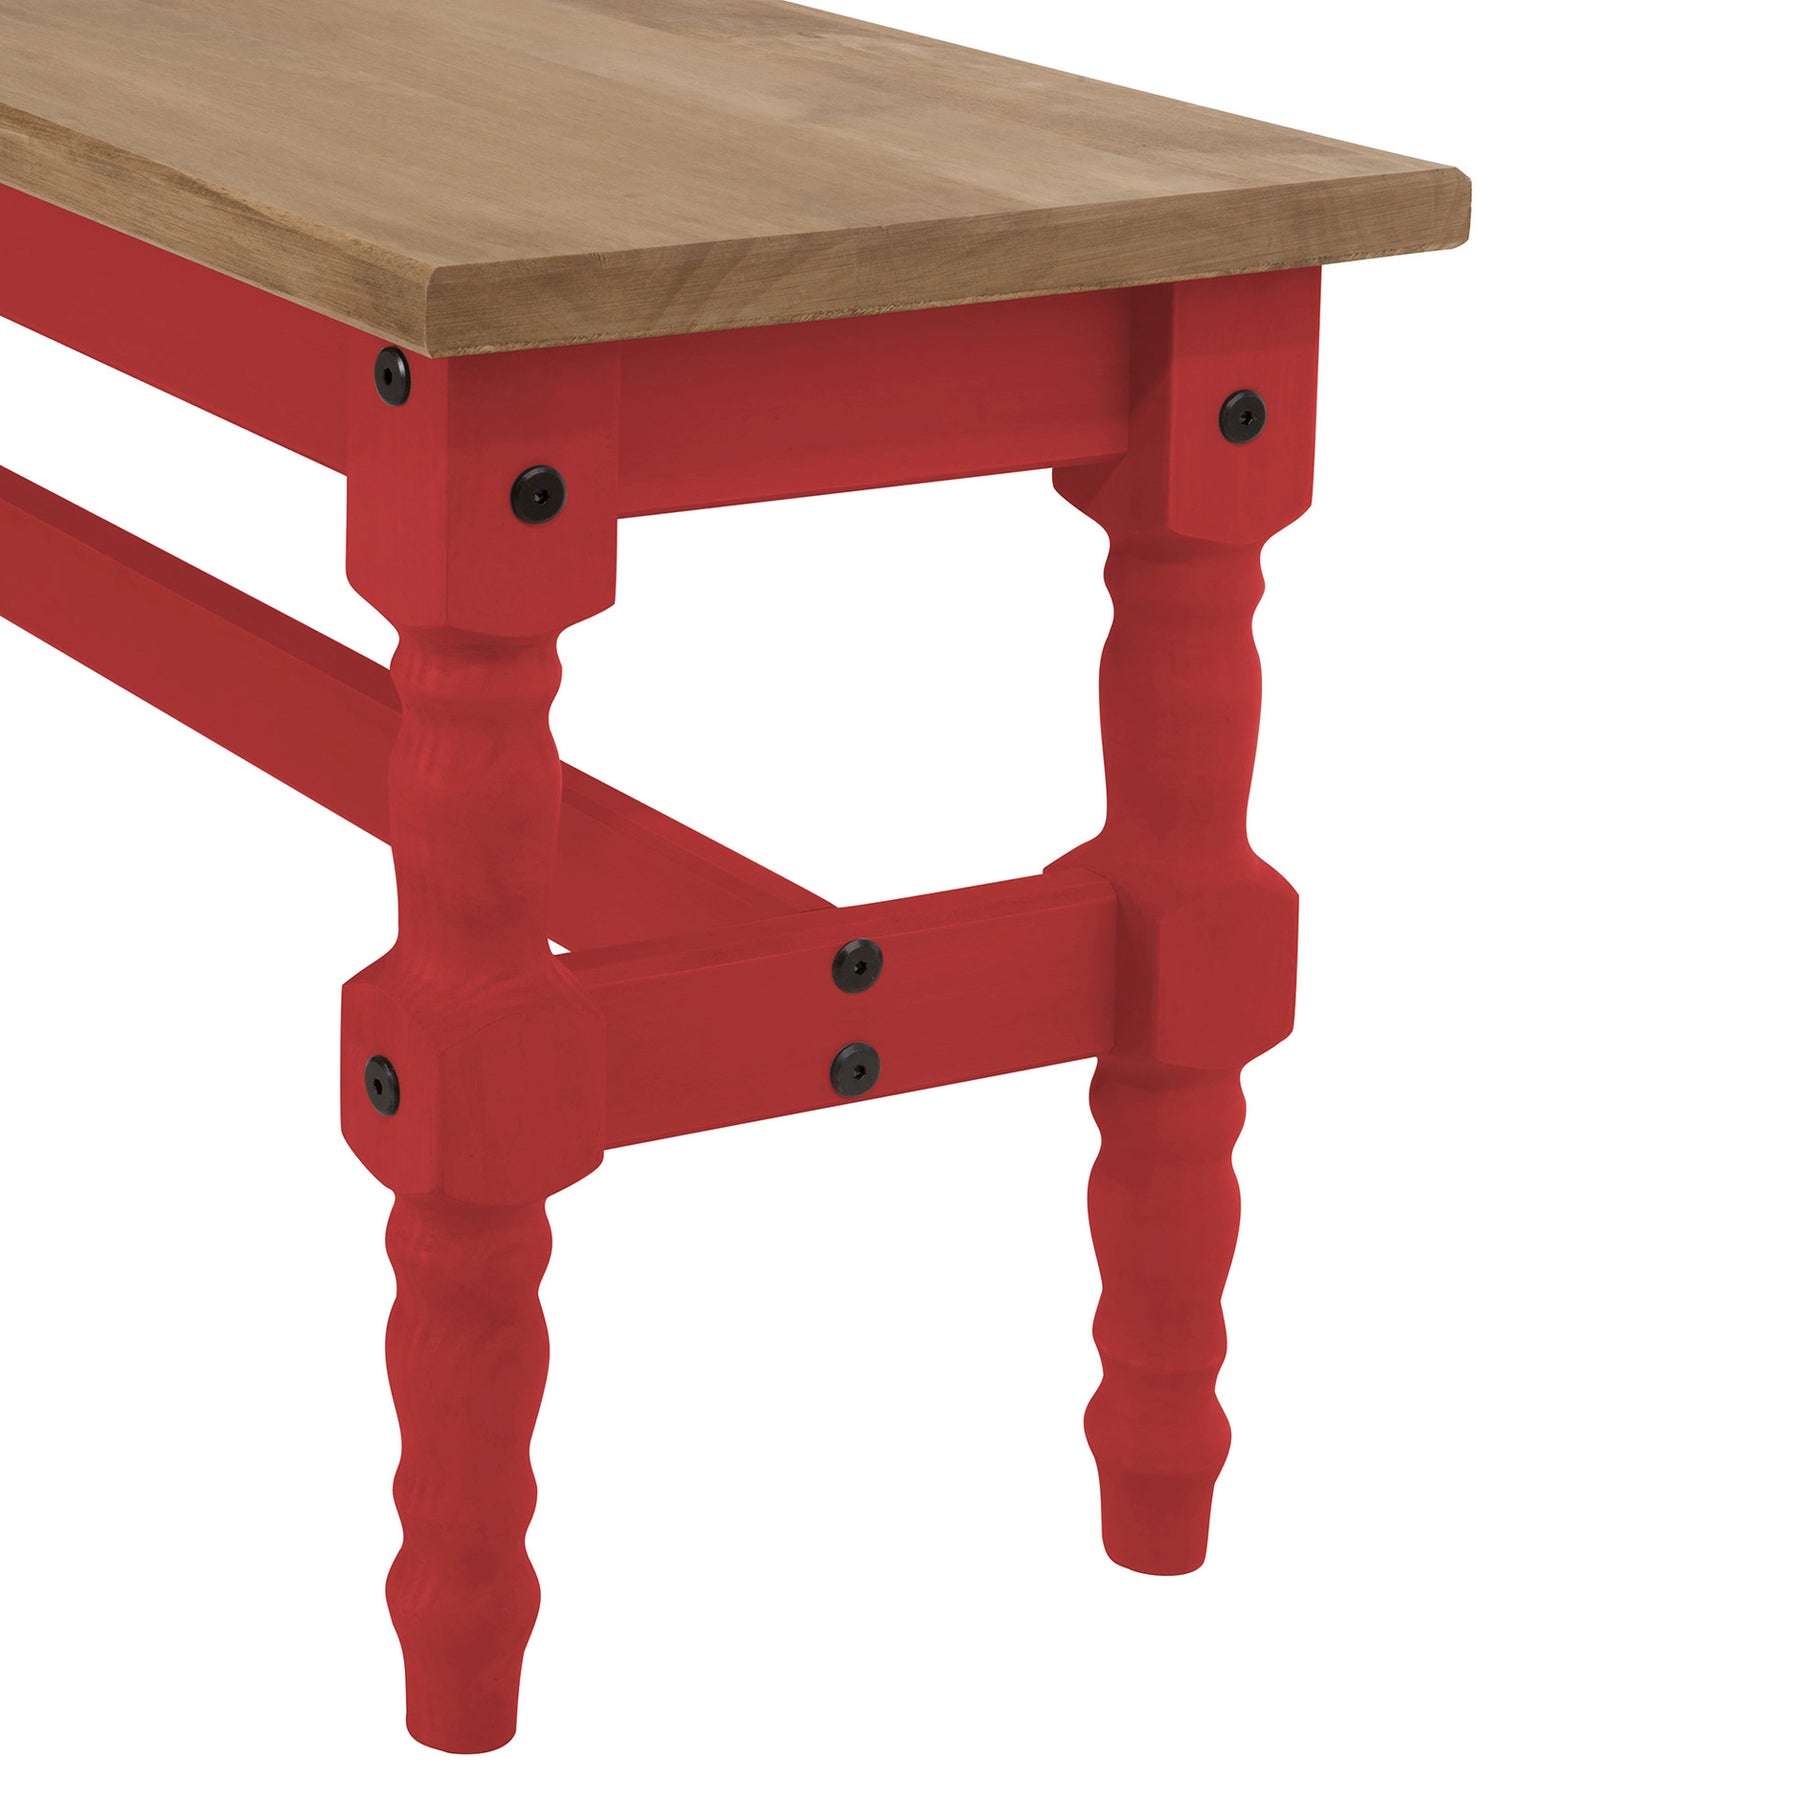 Manhattan Comfort Jay 5-Piece Solid Wood Dining Set with 2 Benches, 2 Chairs, and 1 Table in Red Wash-Minimal & Modern